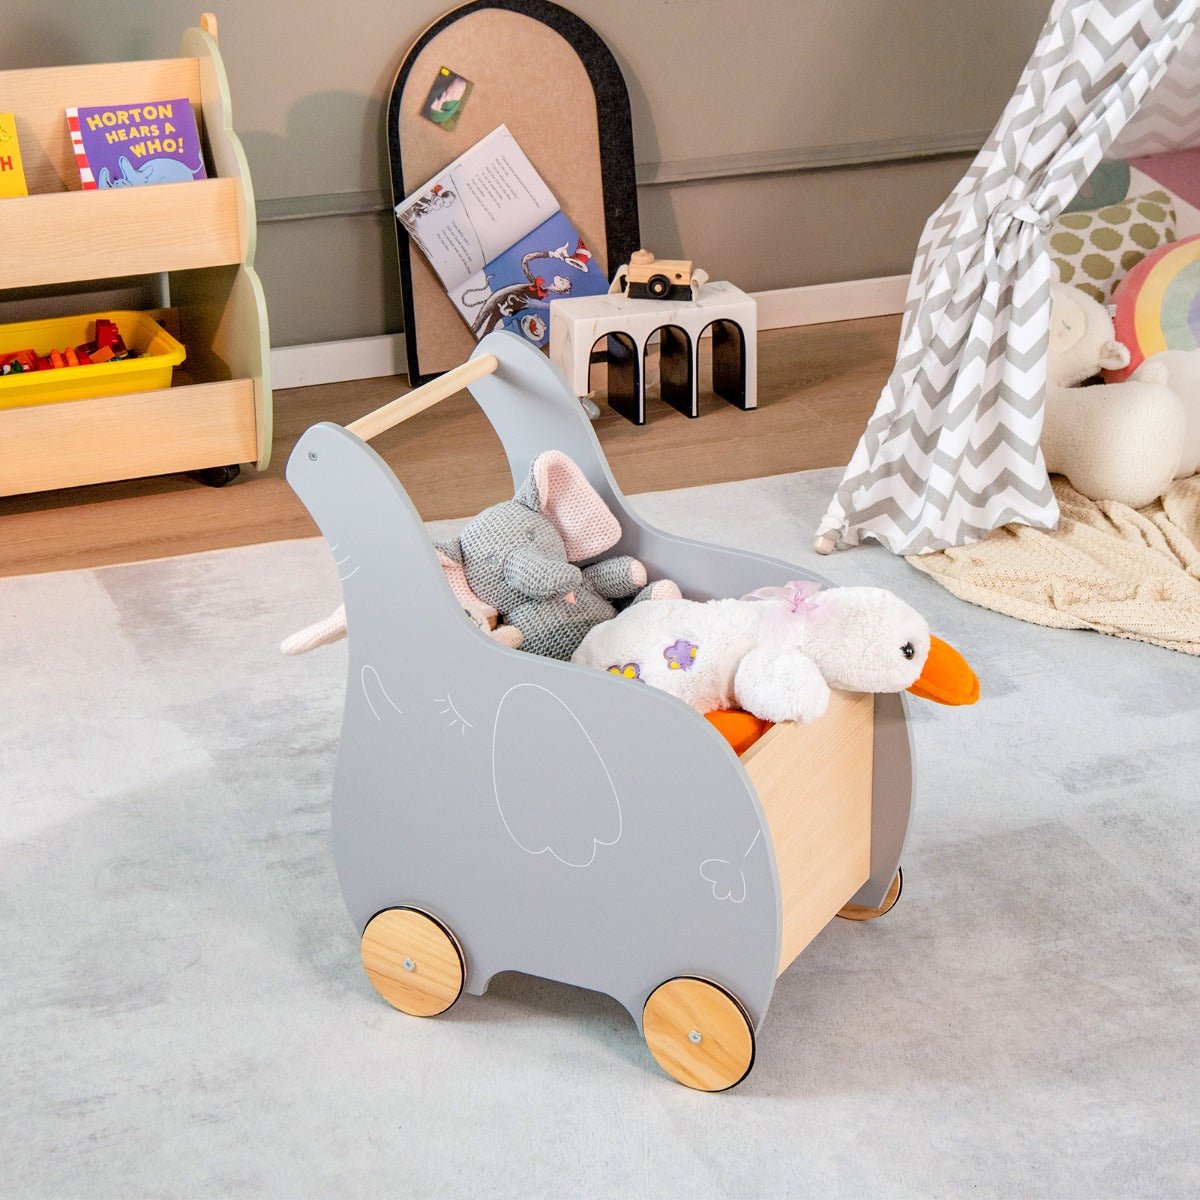 Kid's Wooden Shopping Cart - Rubber Wheels, Imaginative Playtime